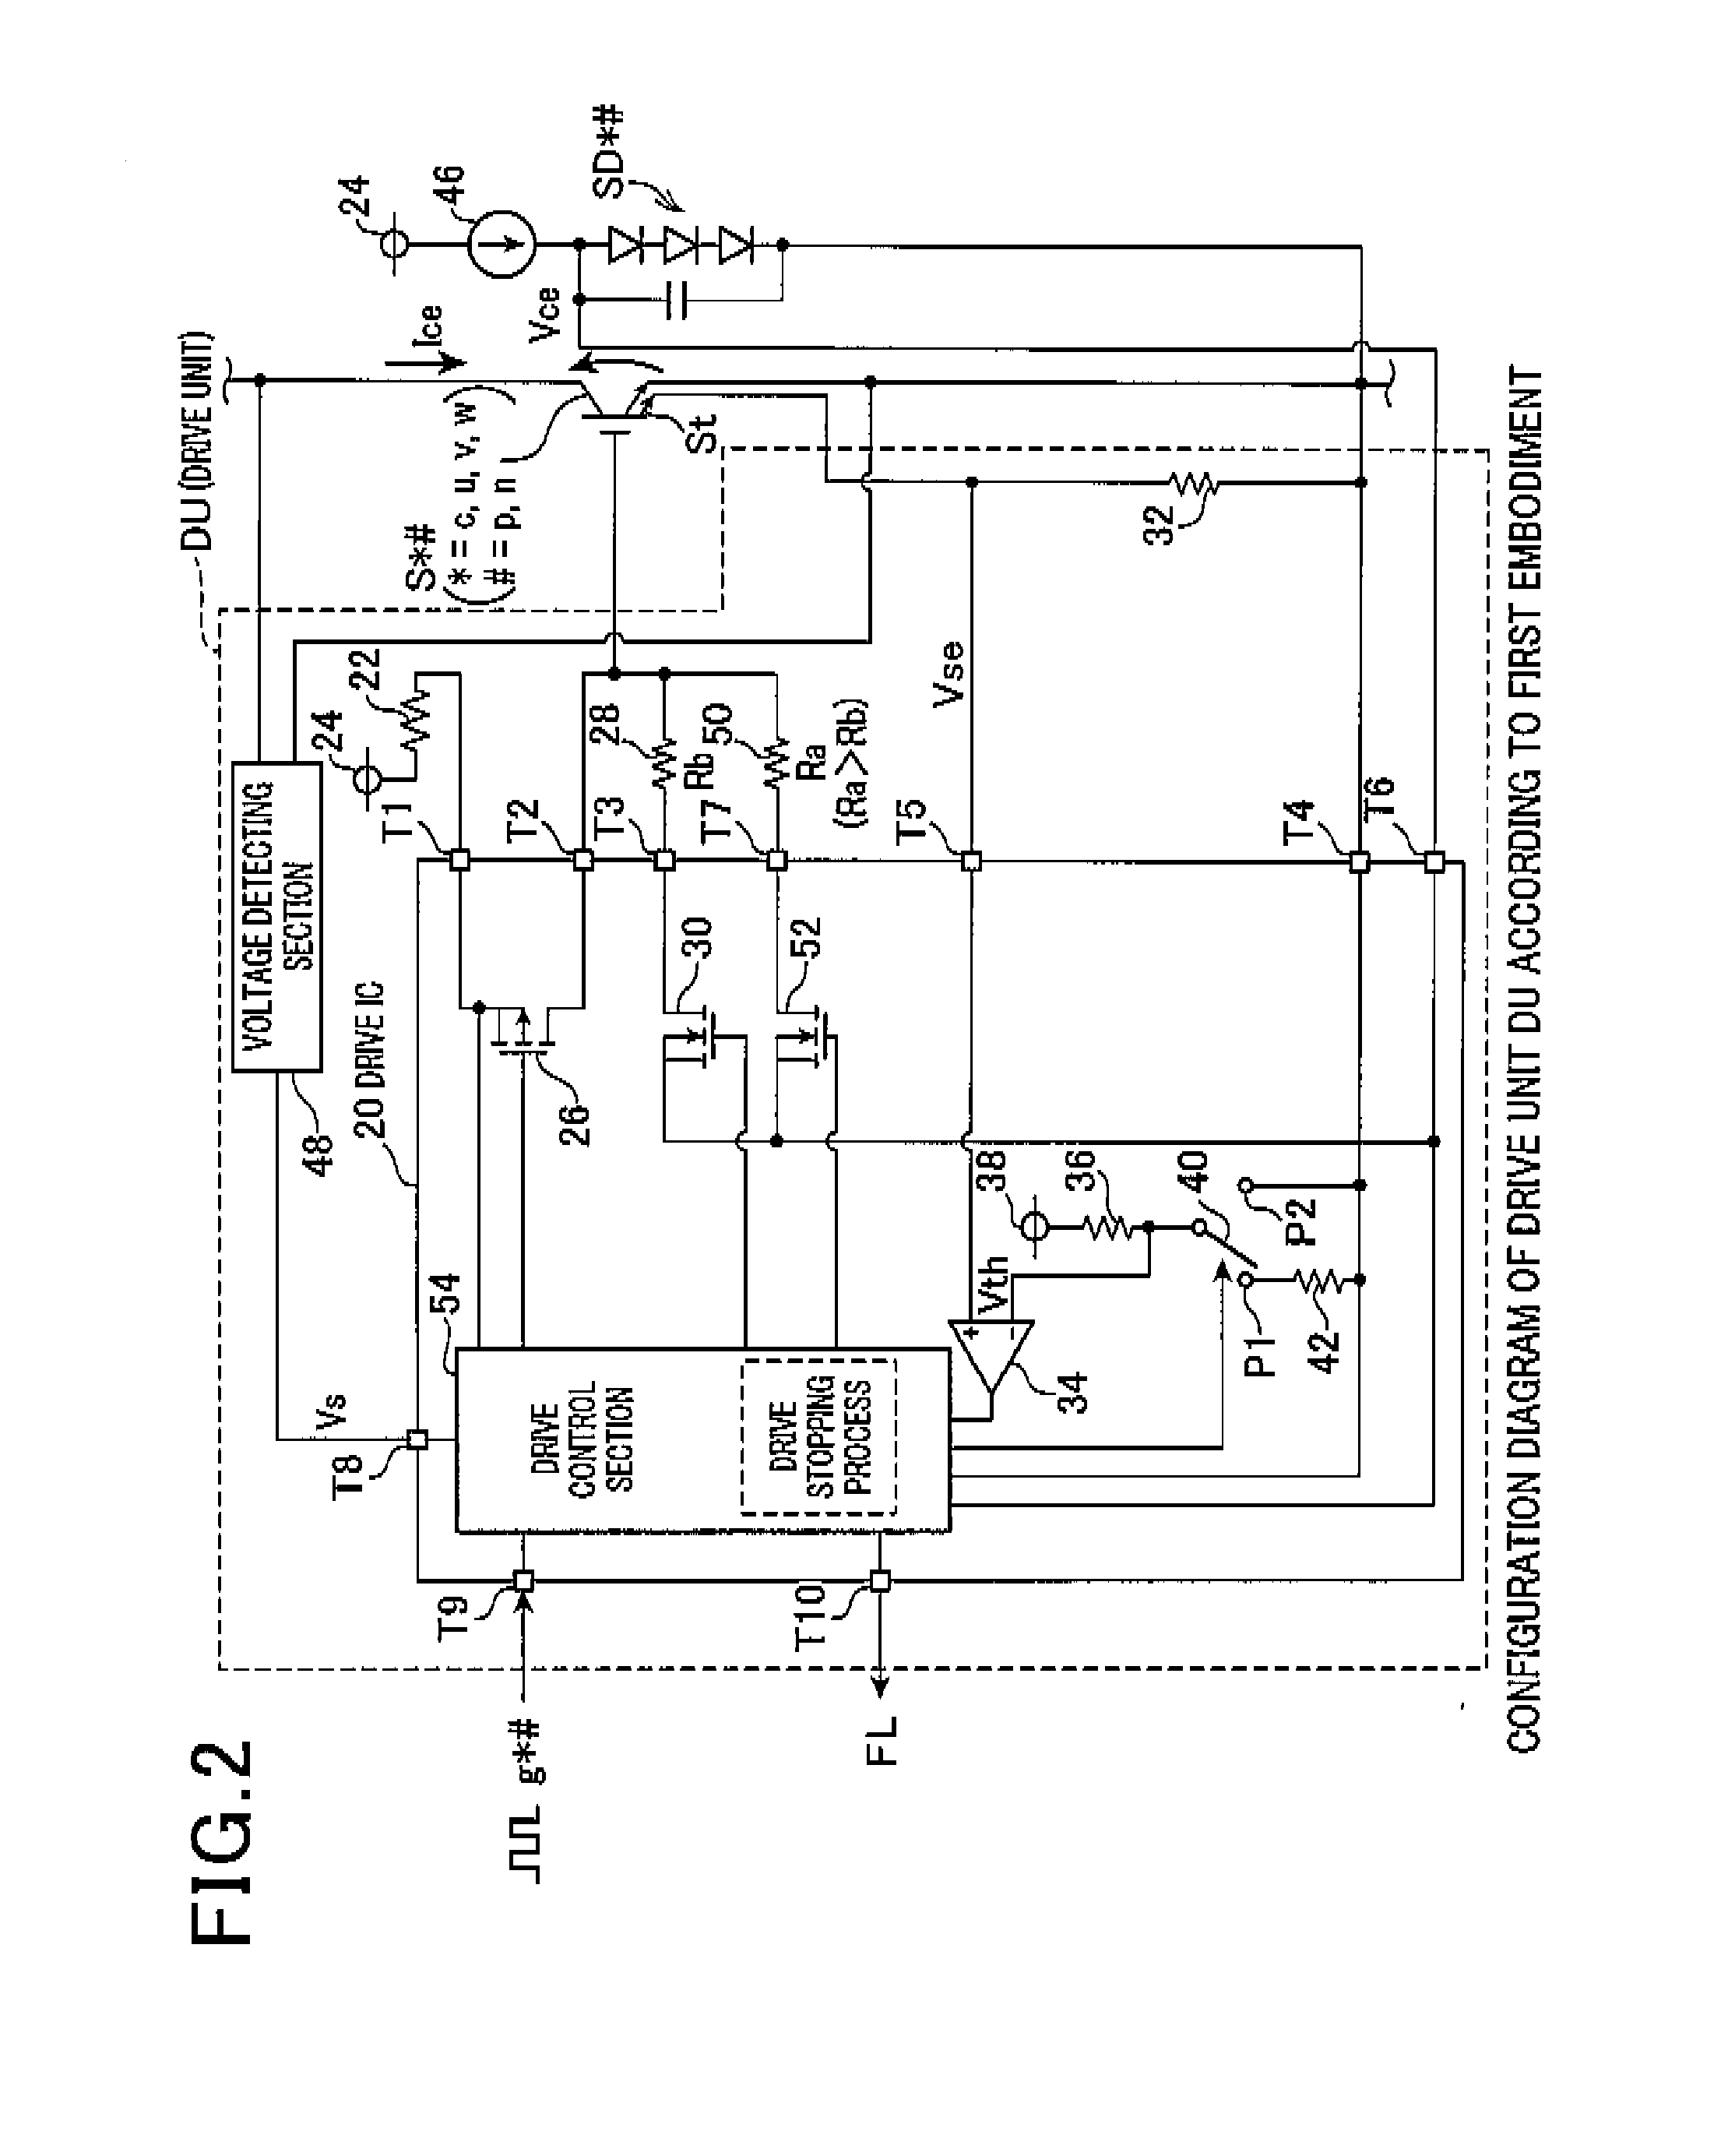 Drive unit for switching element and method thereof